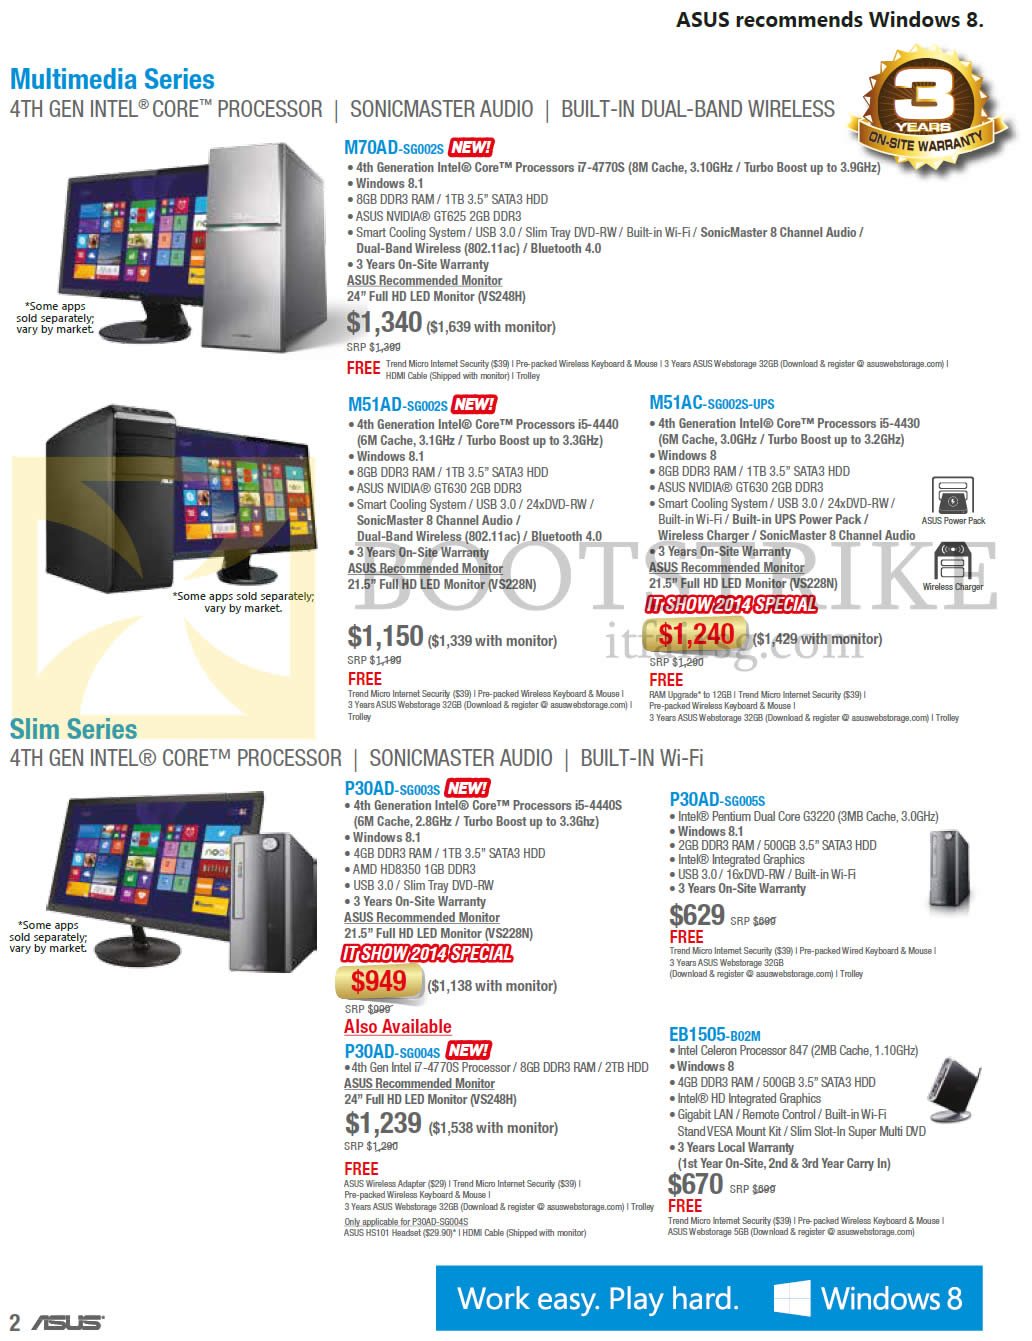 IT SHOW 2014 price list image brochure of ASUS Desktop PCs M70AD-SG002S, M51AD-SG002S, M51AC-SG002S-UPS, P30AD-SG003S SG005S SG004S, EB1505-B02M